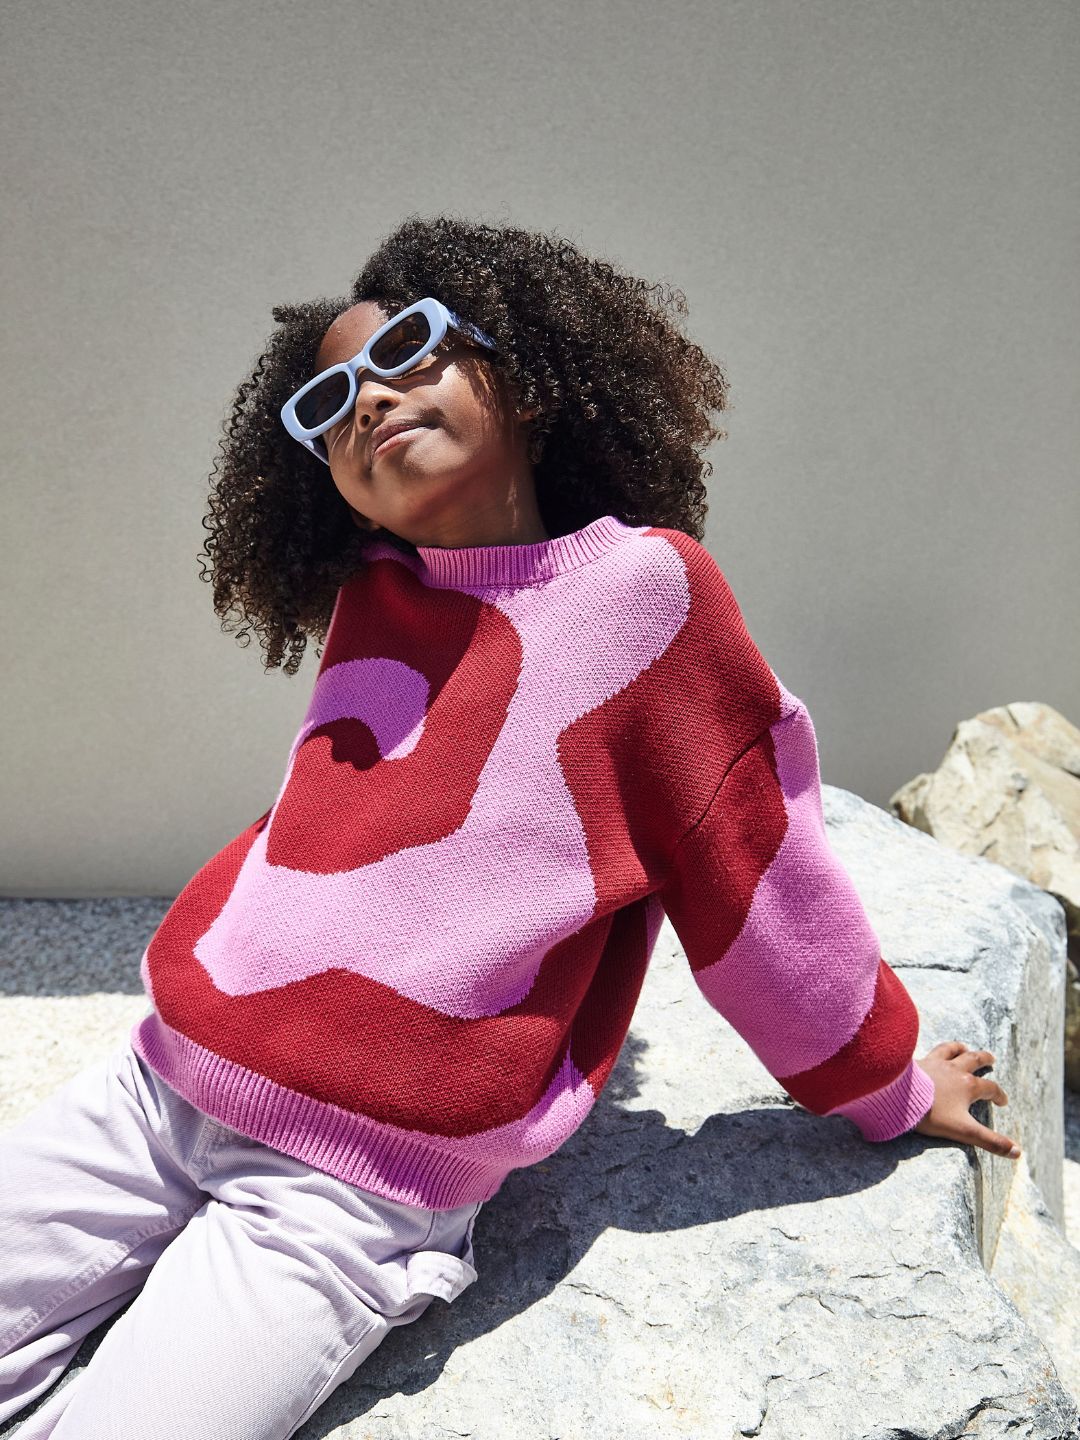 A girl wearing a kids crewneck sweater in bright pink, with a large single red swirl design that covers the entire sweater. She is seated on a rock, with a slight smile, and wears blue rectangular sunglasses.